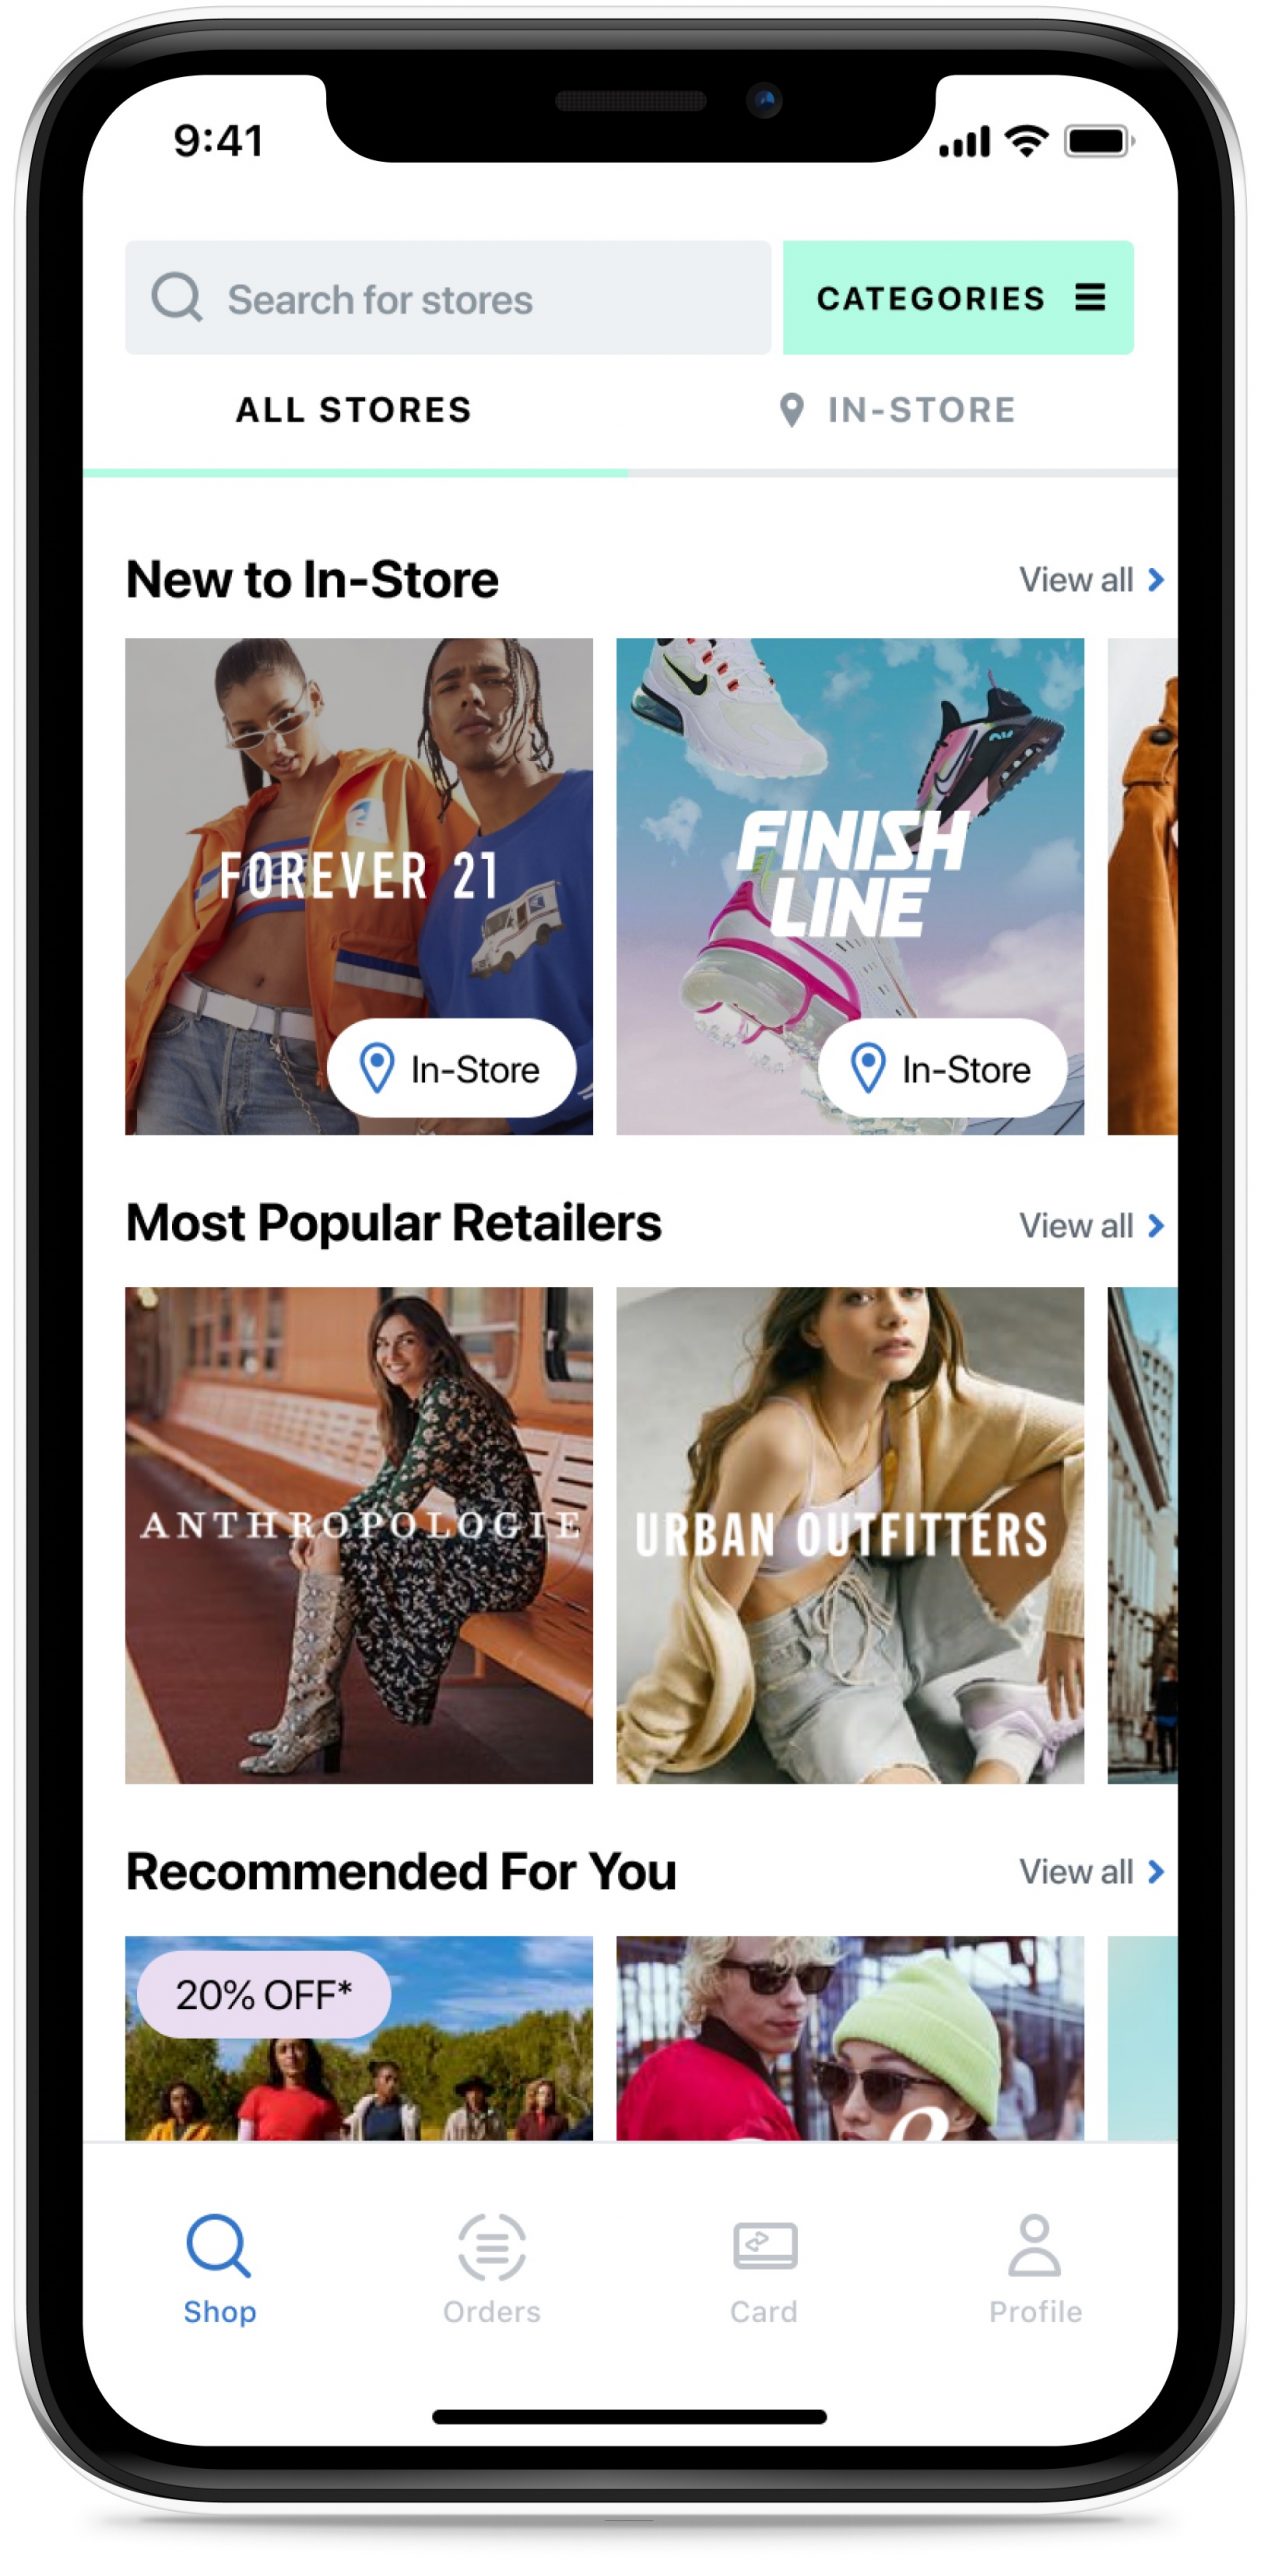 Categories on Afterpay